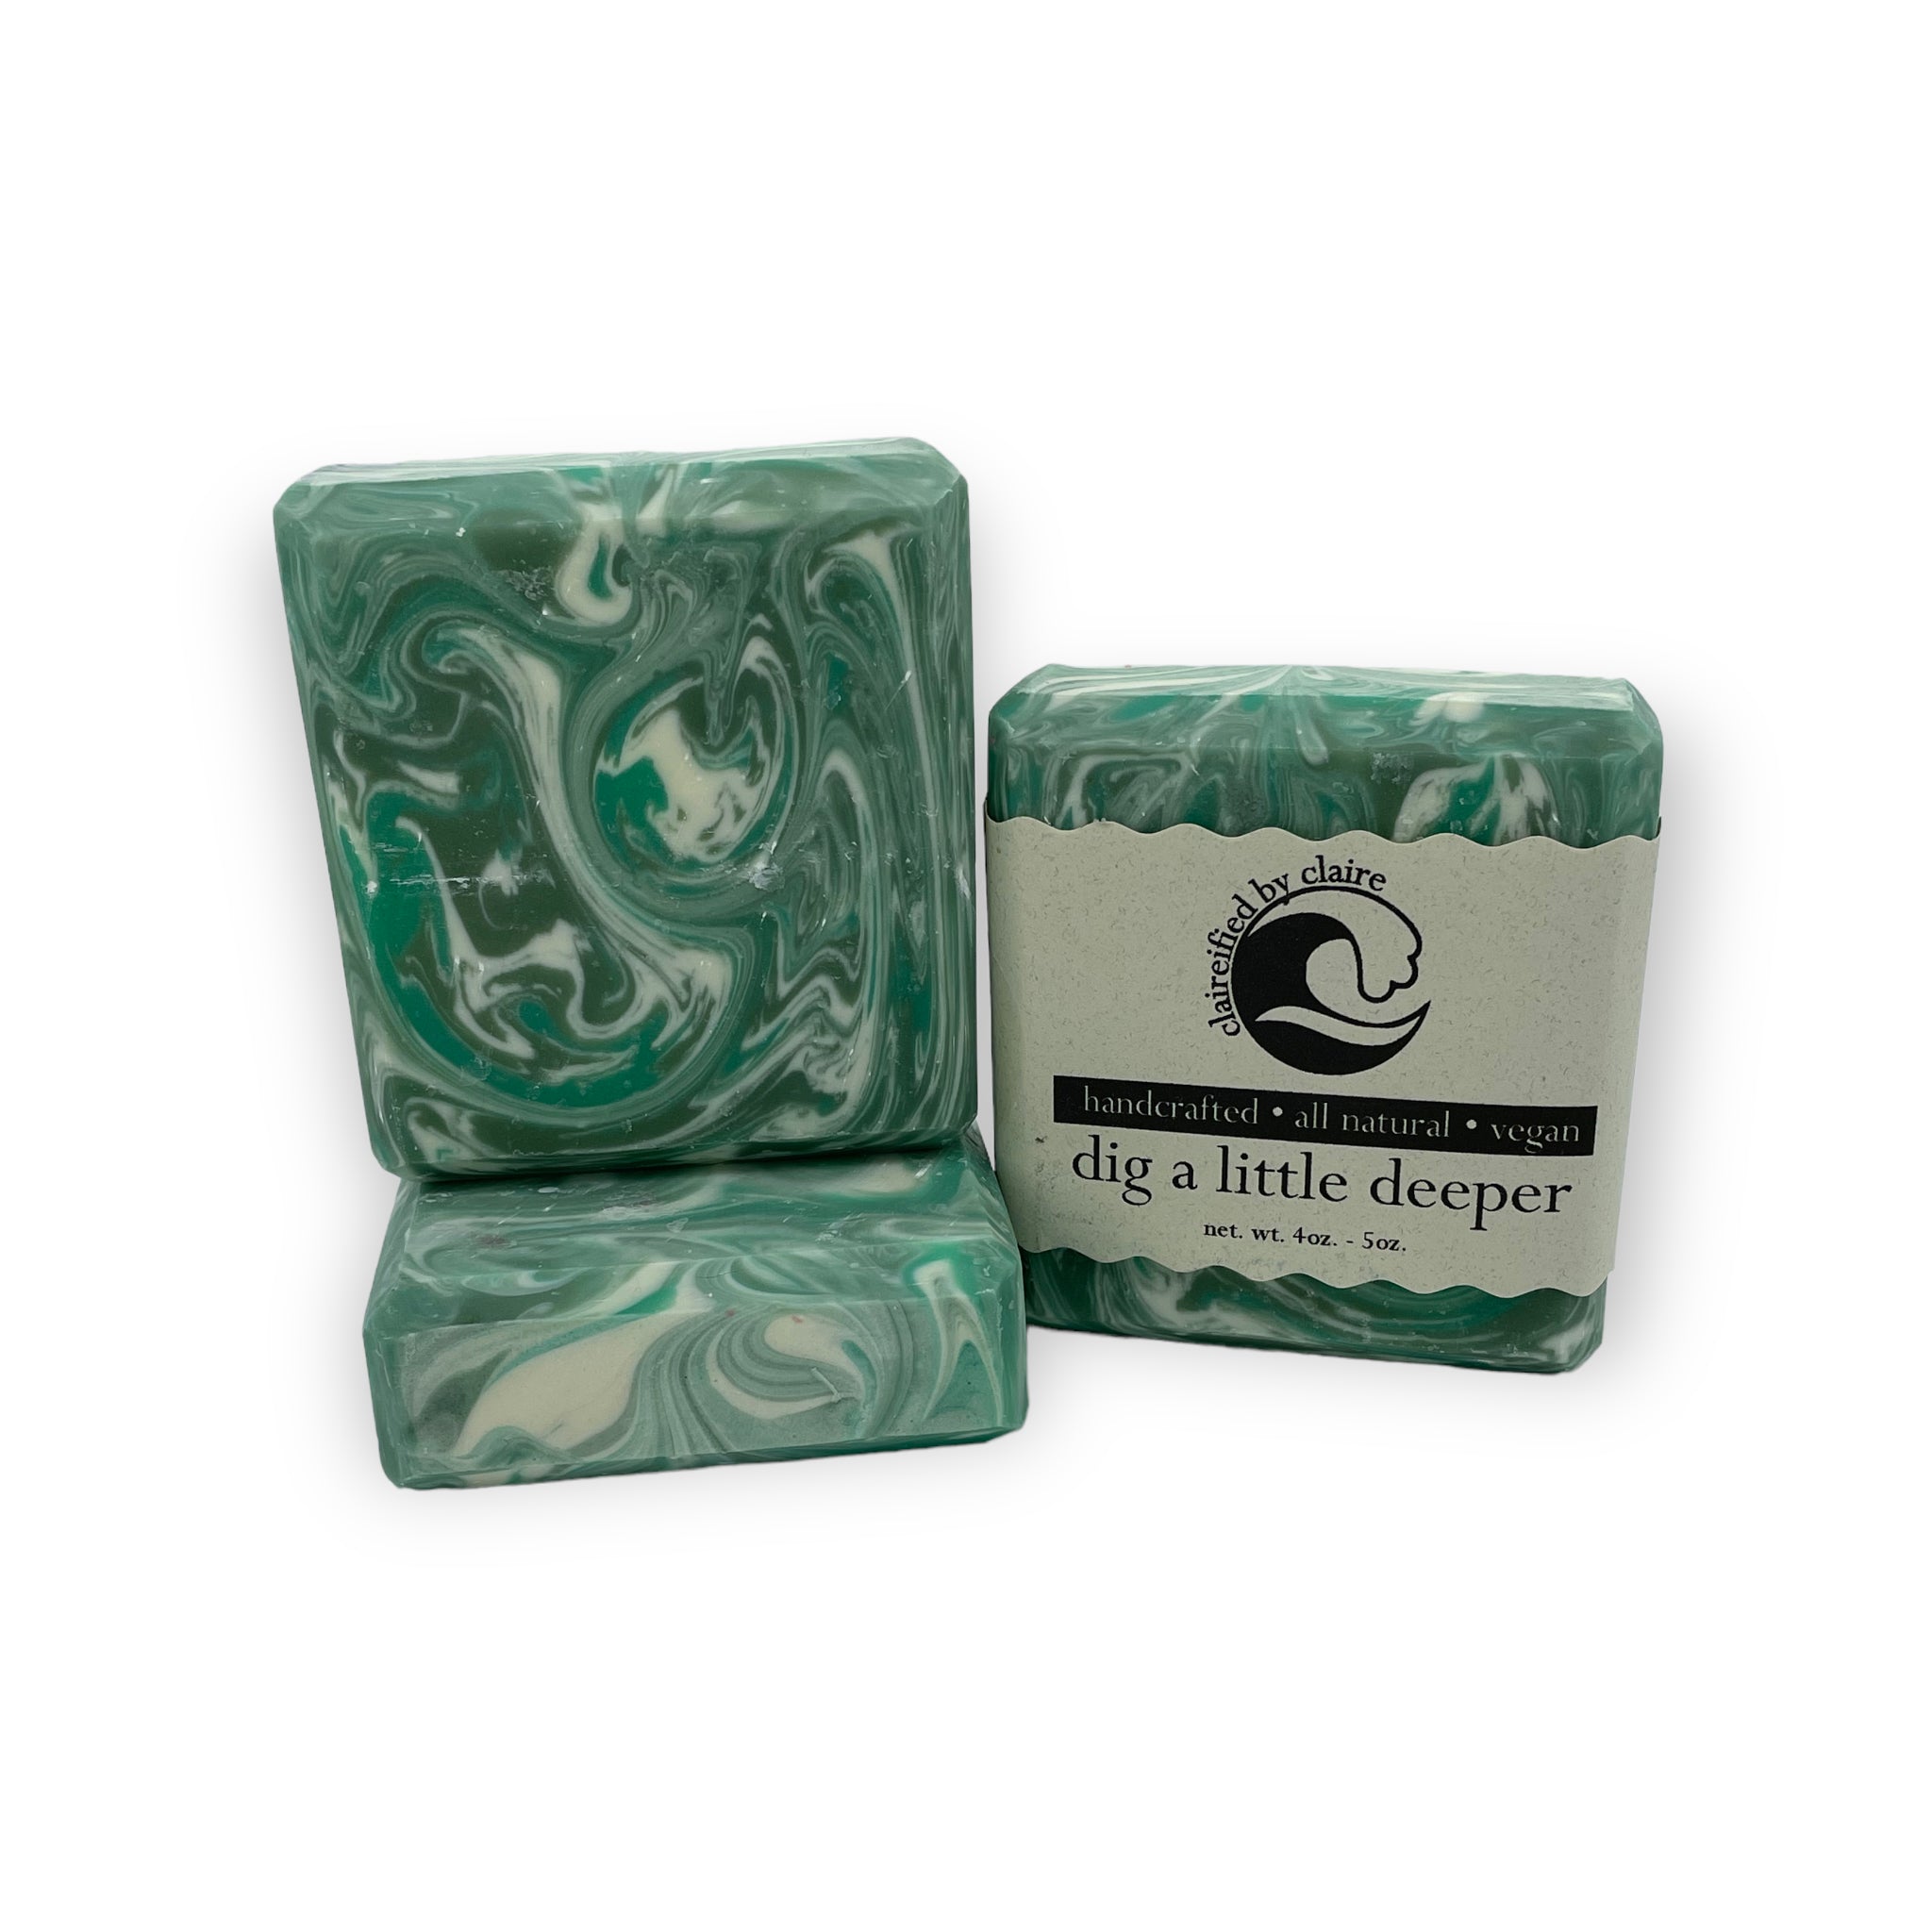 Dig A Little Deeper handmade soap inspired by Disney's Tiana from The Princess and the Frog - 0